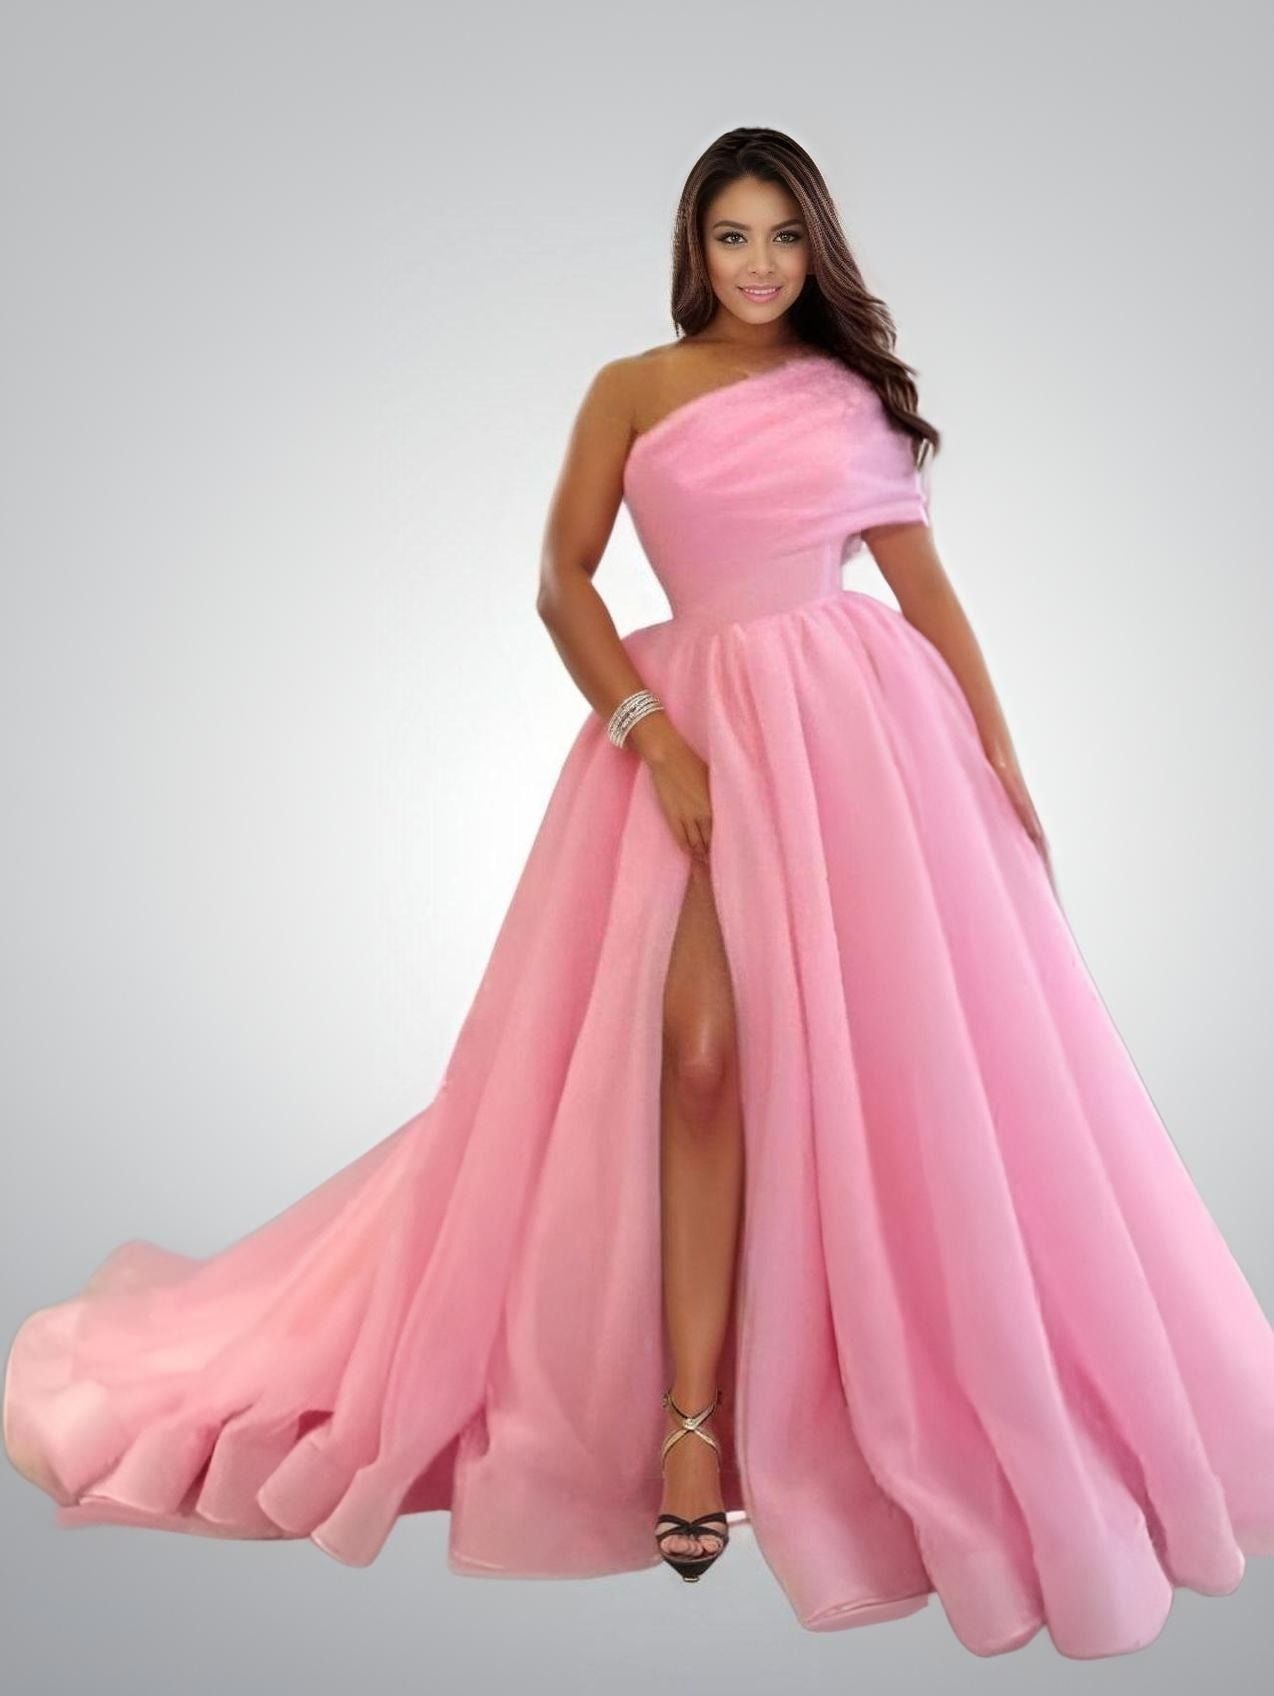 "Model showcasing Pink Alice one-shoulder organza gown"